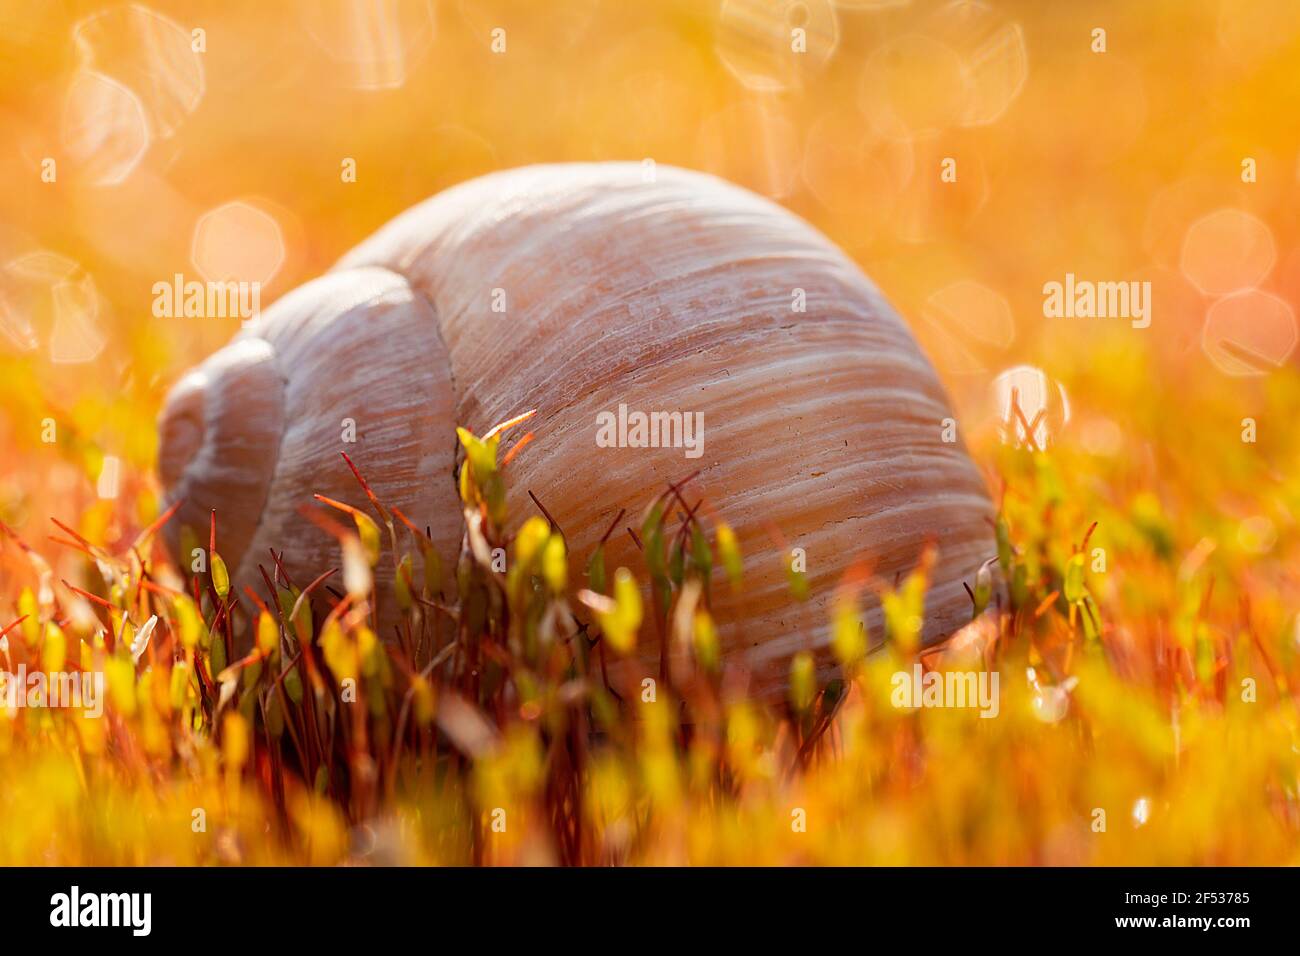 Macro photo of snail shell in moss with raindrops, dew water droplet. Spring background Stock Photo